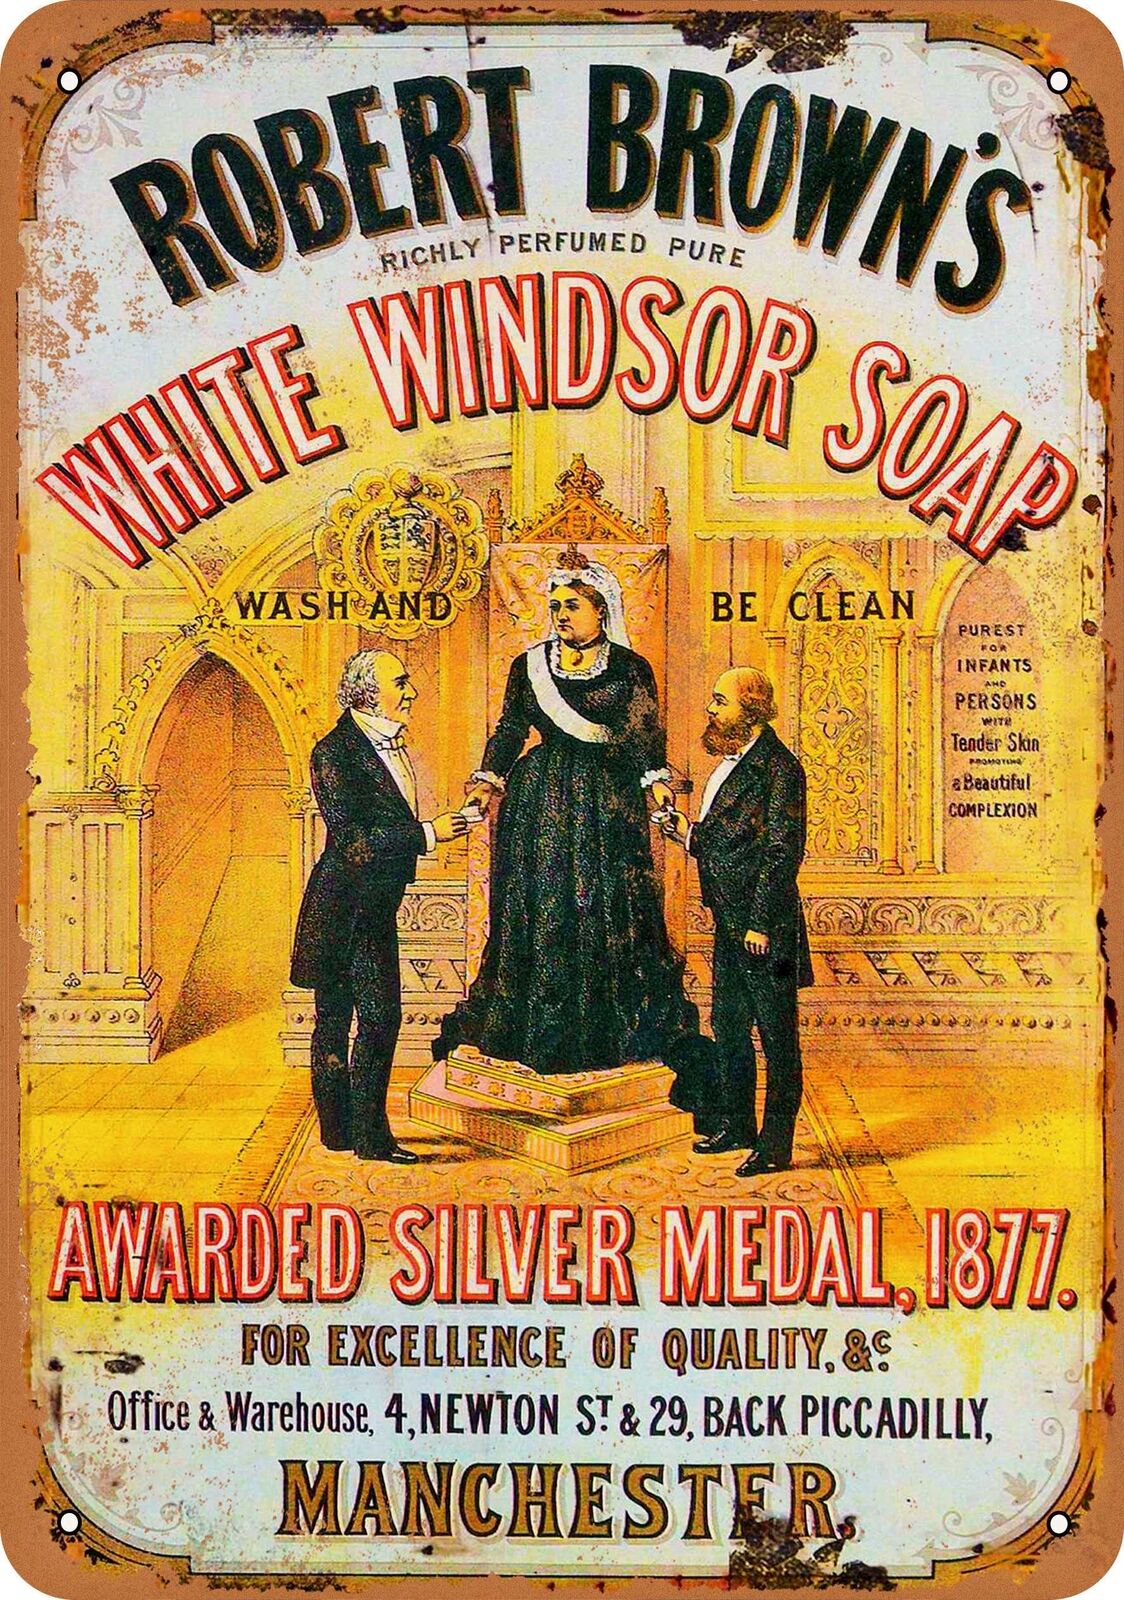 Metal Sign - White Windsor Soap - Vintage Look Reproduction